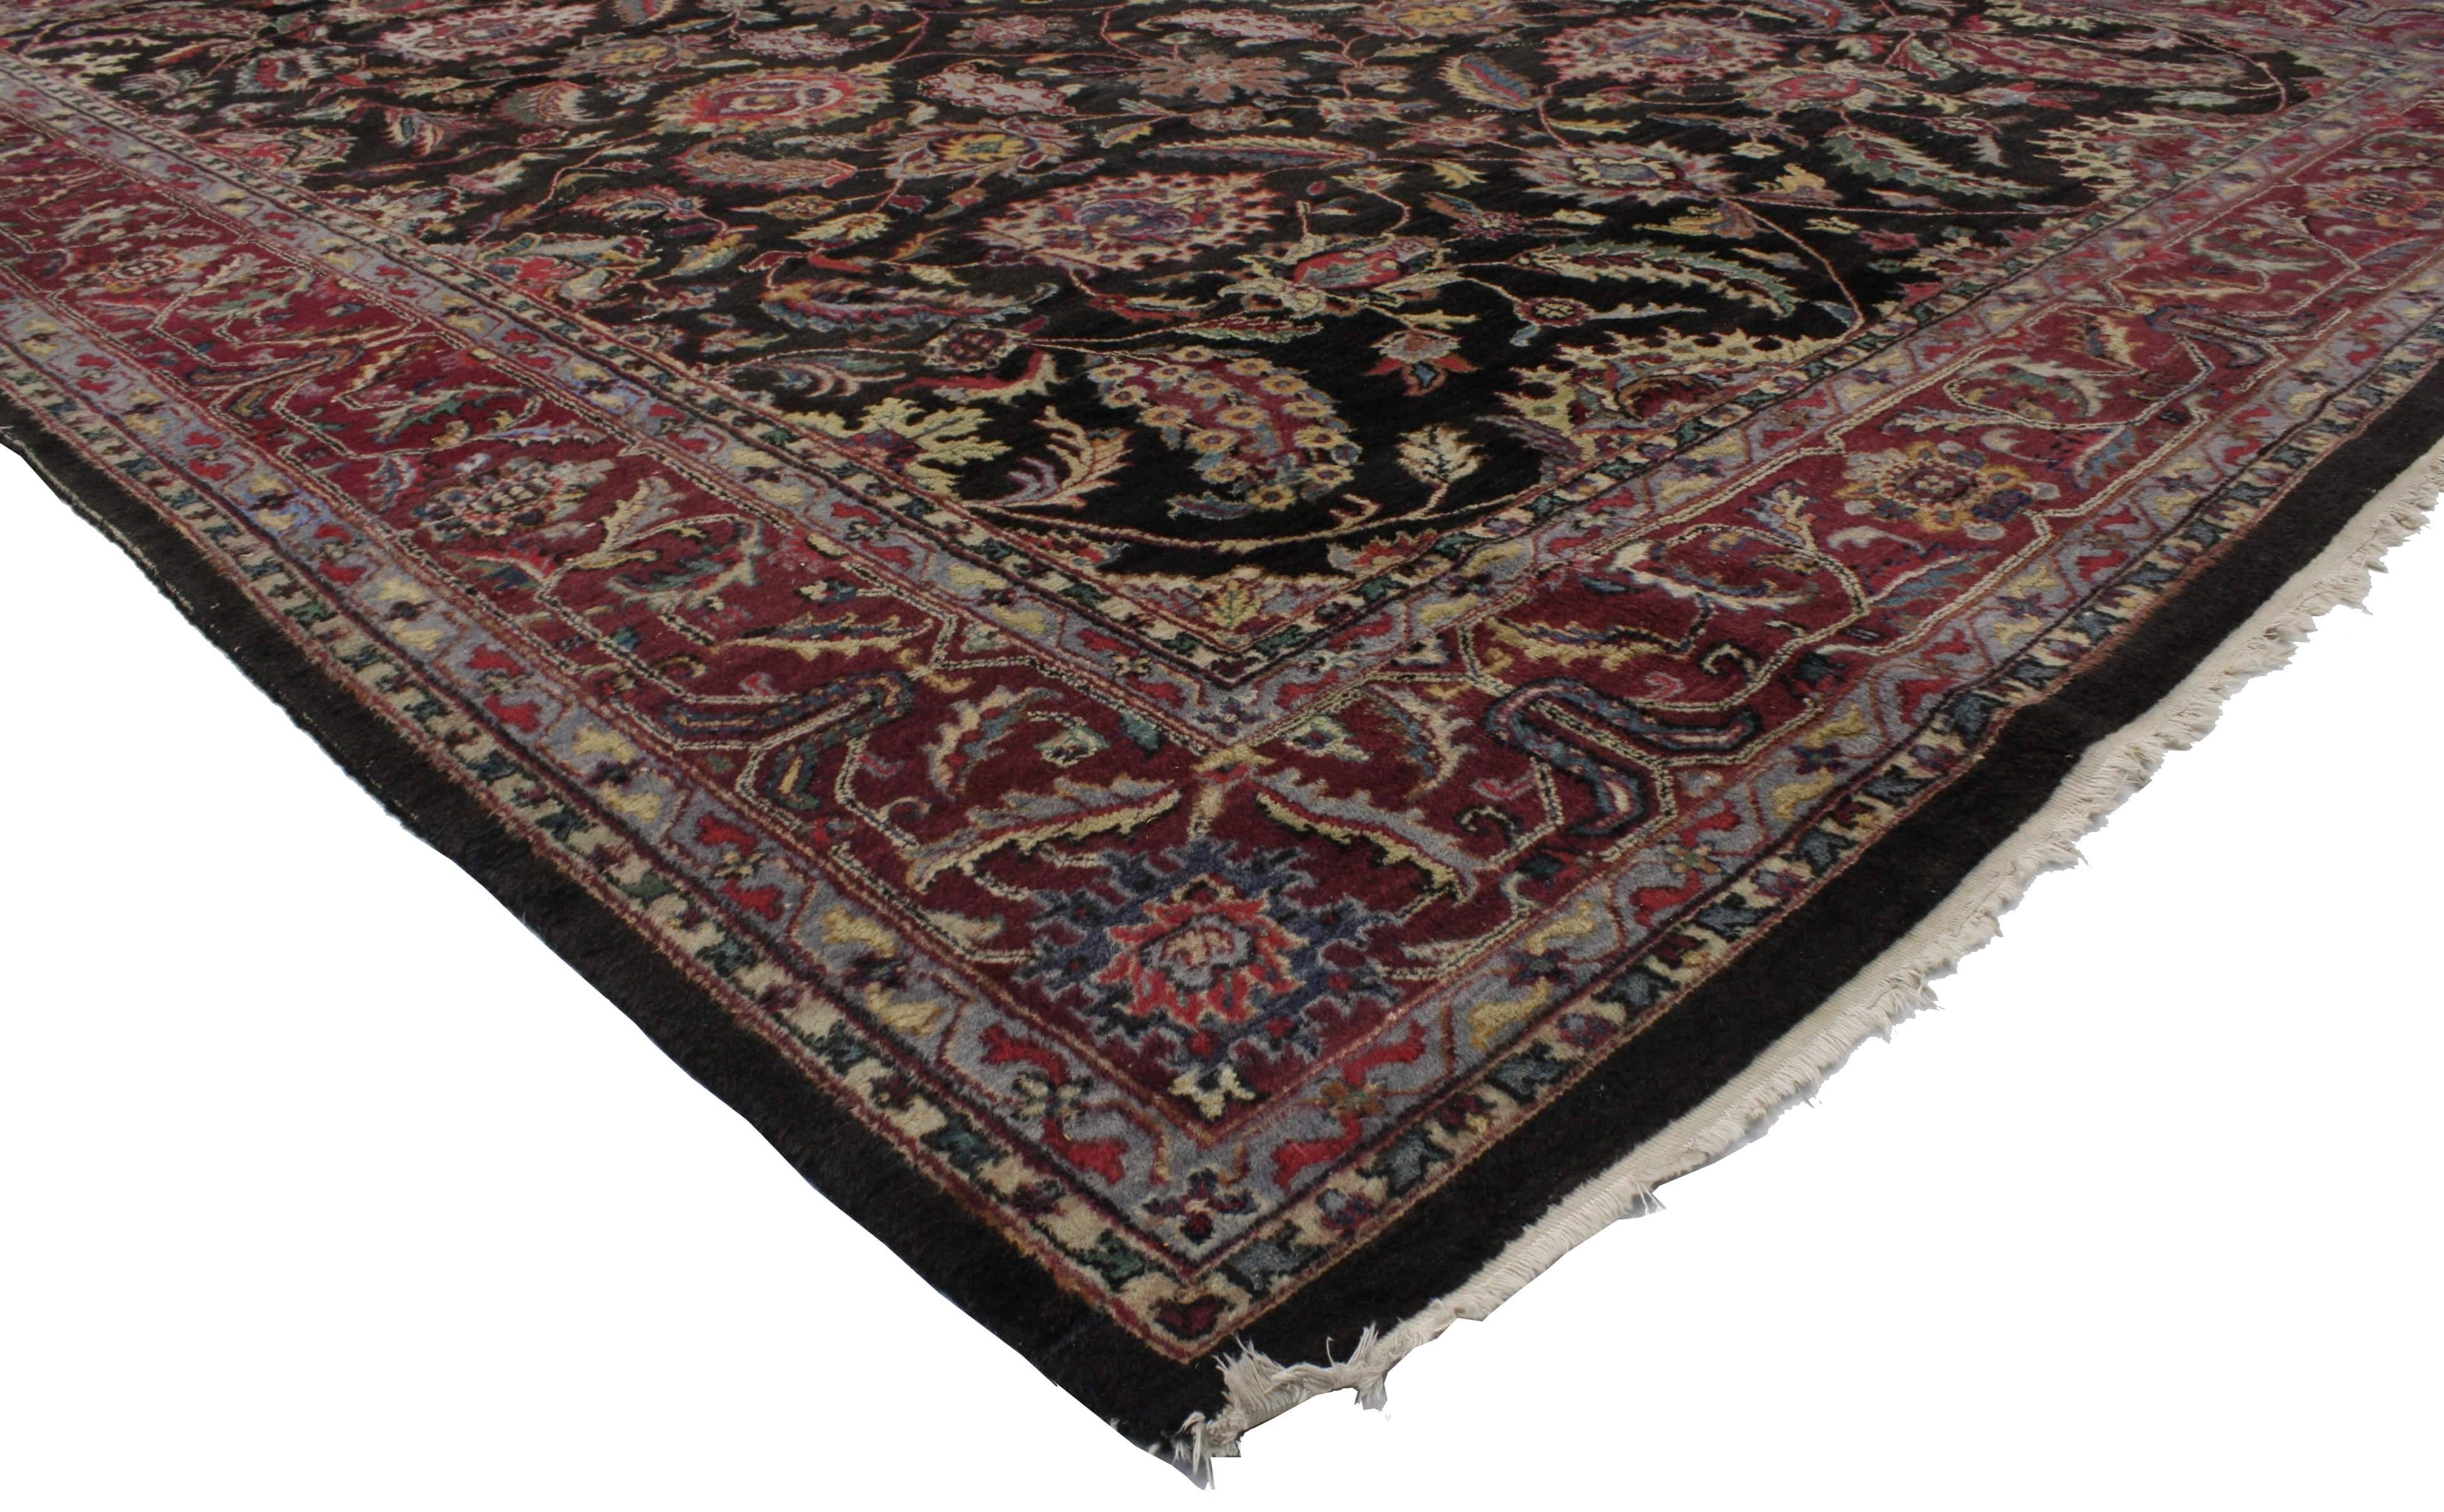 Renaissance Vintage Indian Rug with Traditional Persian Style